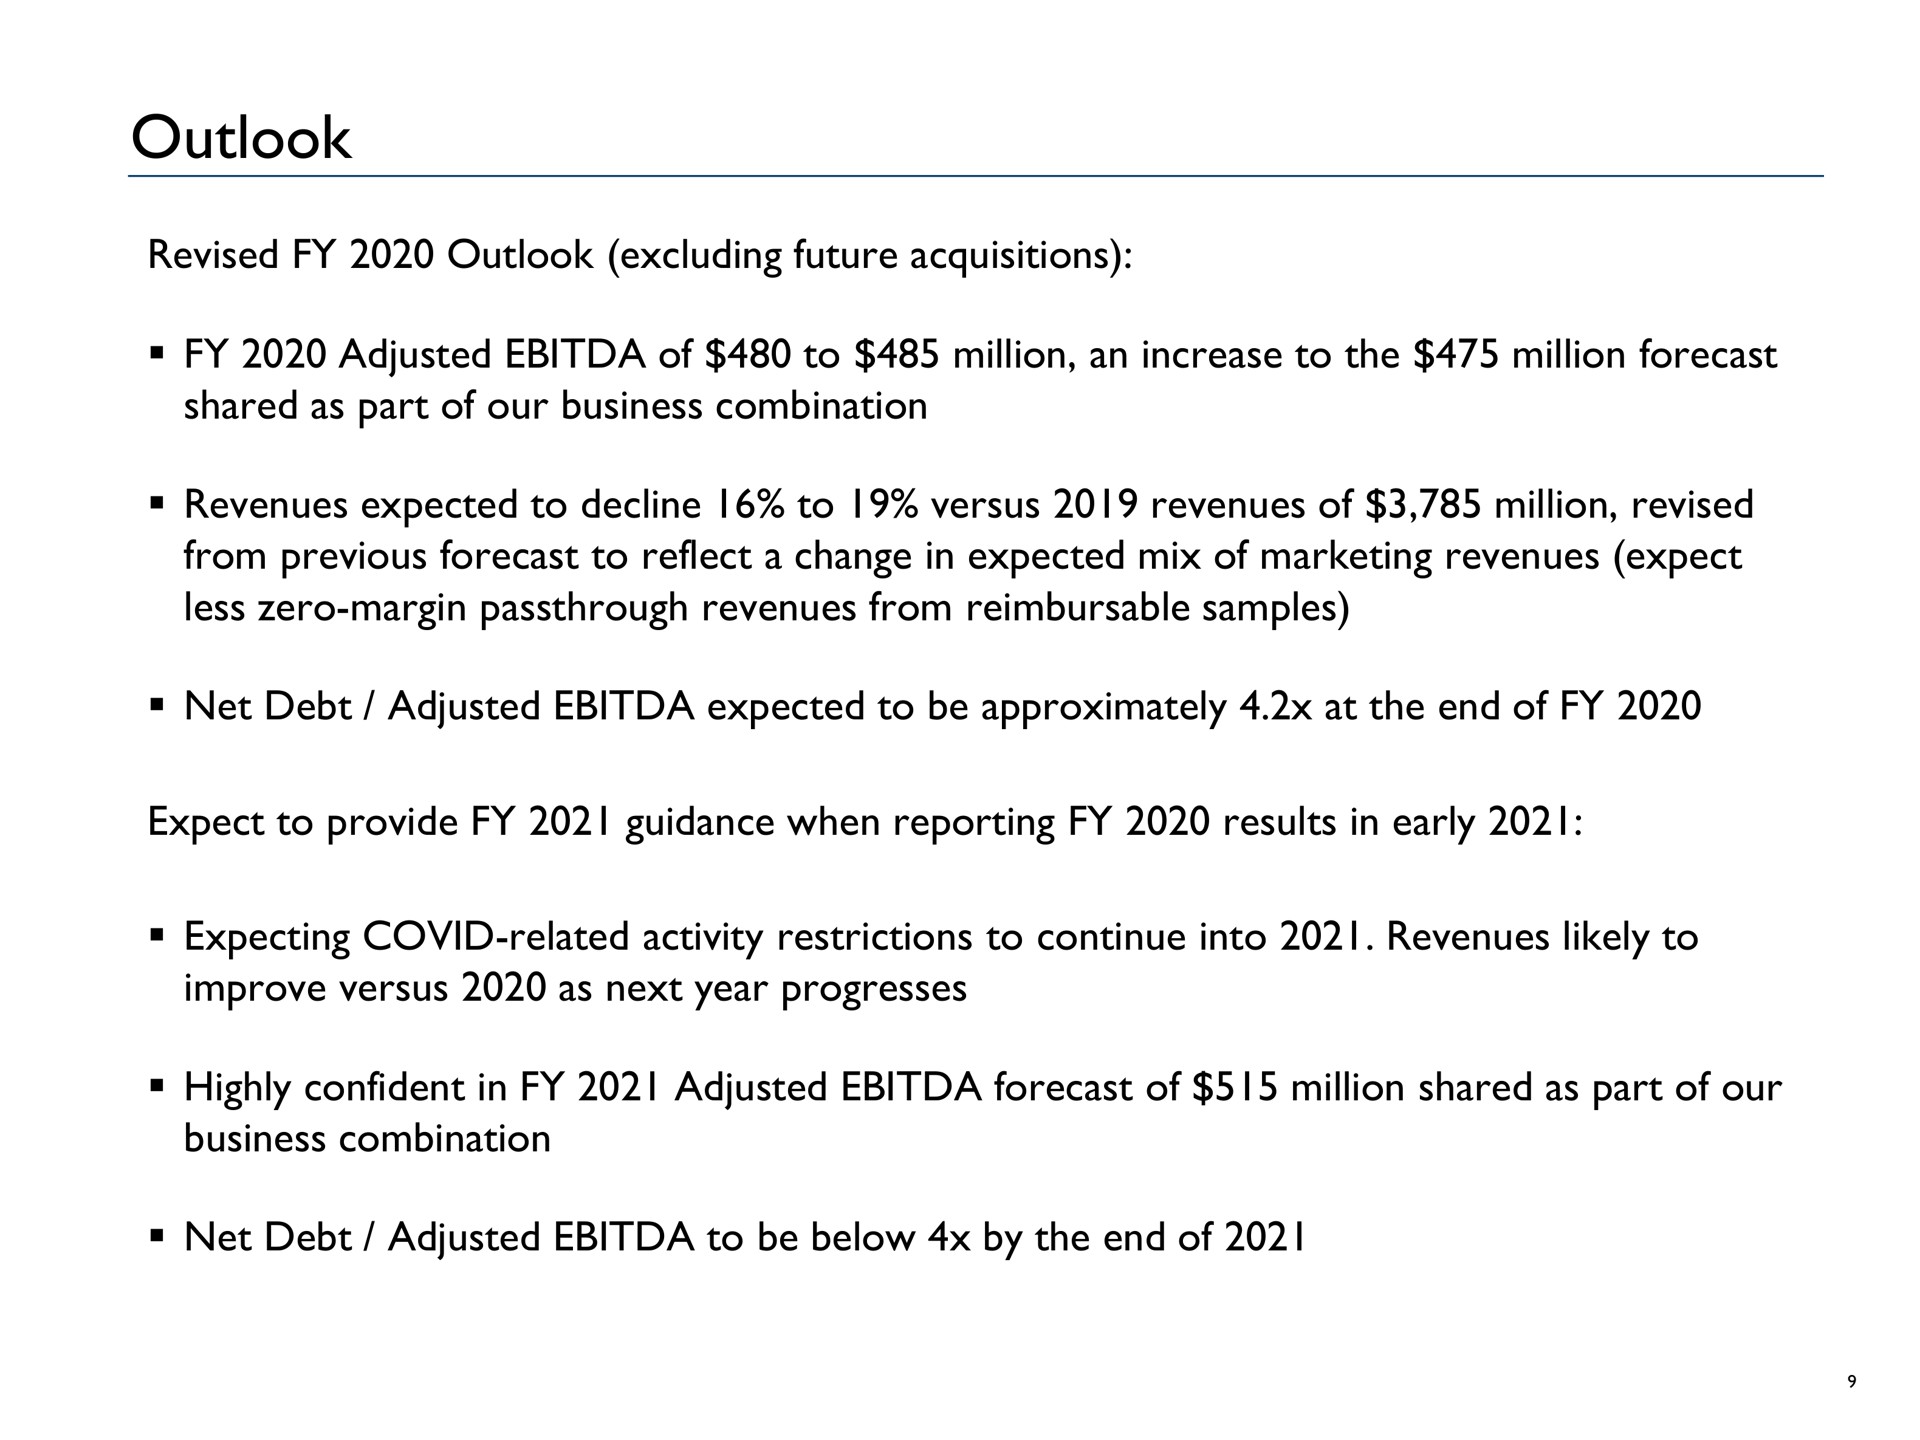 outlook revised outlook excluding future acquisitions adjusted of to million an increase to the million forecast shared as part of our business combination revenues expected to decline to versus revenues of million revised from previous forecast to reflect a change in expected mix of marketing revenues expect less zero margin revenues from reimbursable samples net debt adjusted expected to be approximately at the end of expect to provide guidance when reporting results in early expecting covid related activity restrictions to continue into revenues likely to improve versus as next year progresses highly confident in adjusted forecast of million shared as part of our business combination net debt adjusted to be below by the end of | Advantage Solutions